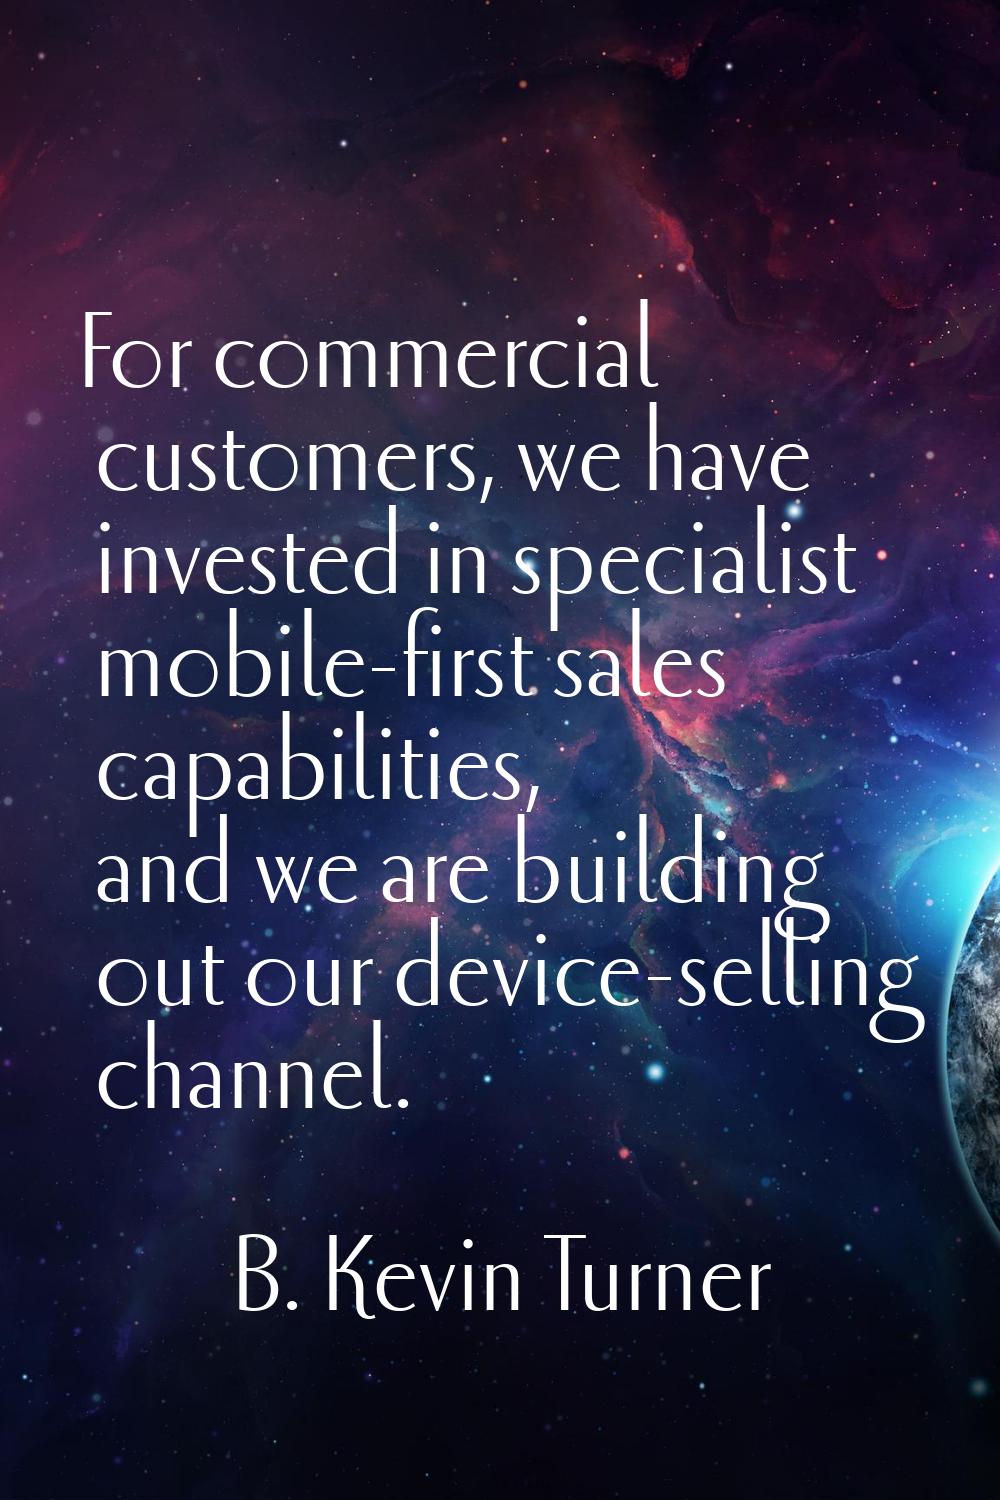 For commercial customers, we have invested in specialist mobile-first sales capabilities, and we ar